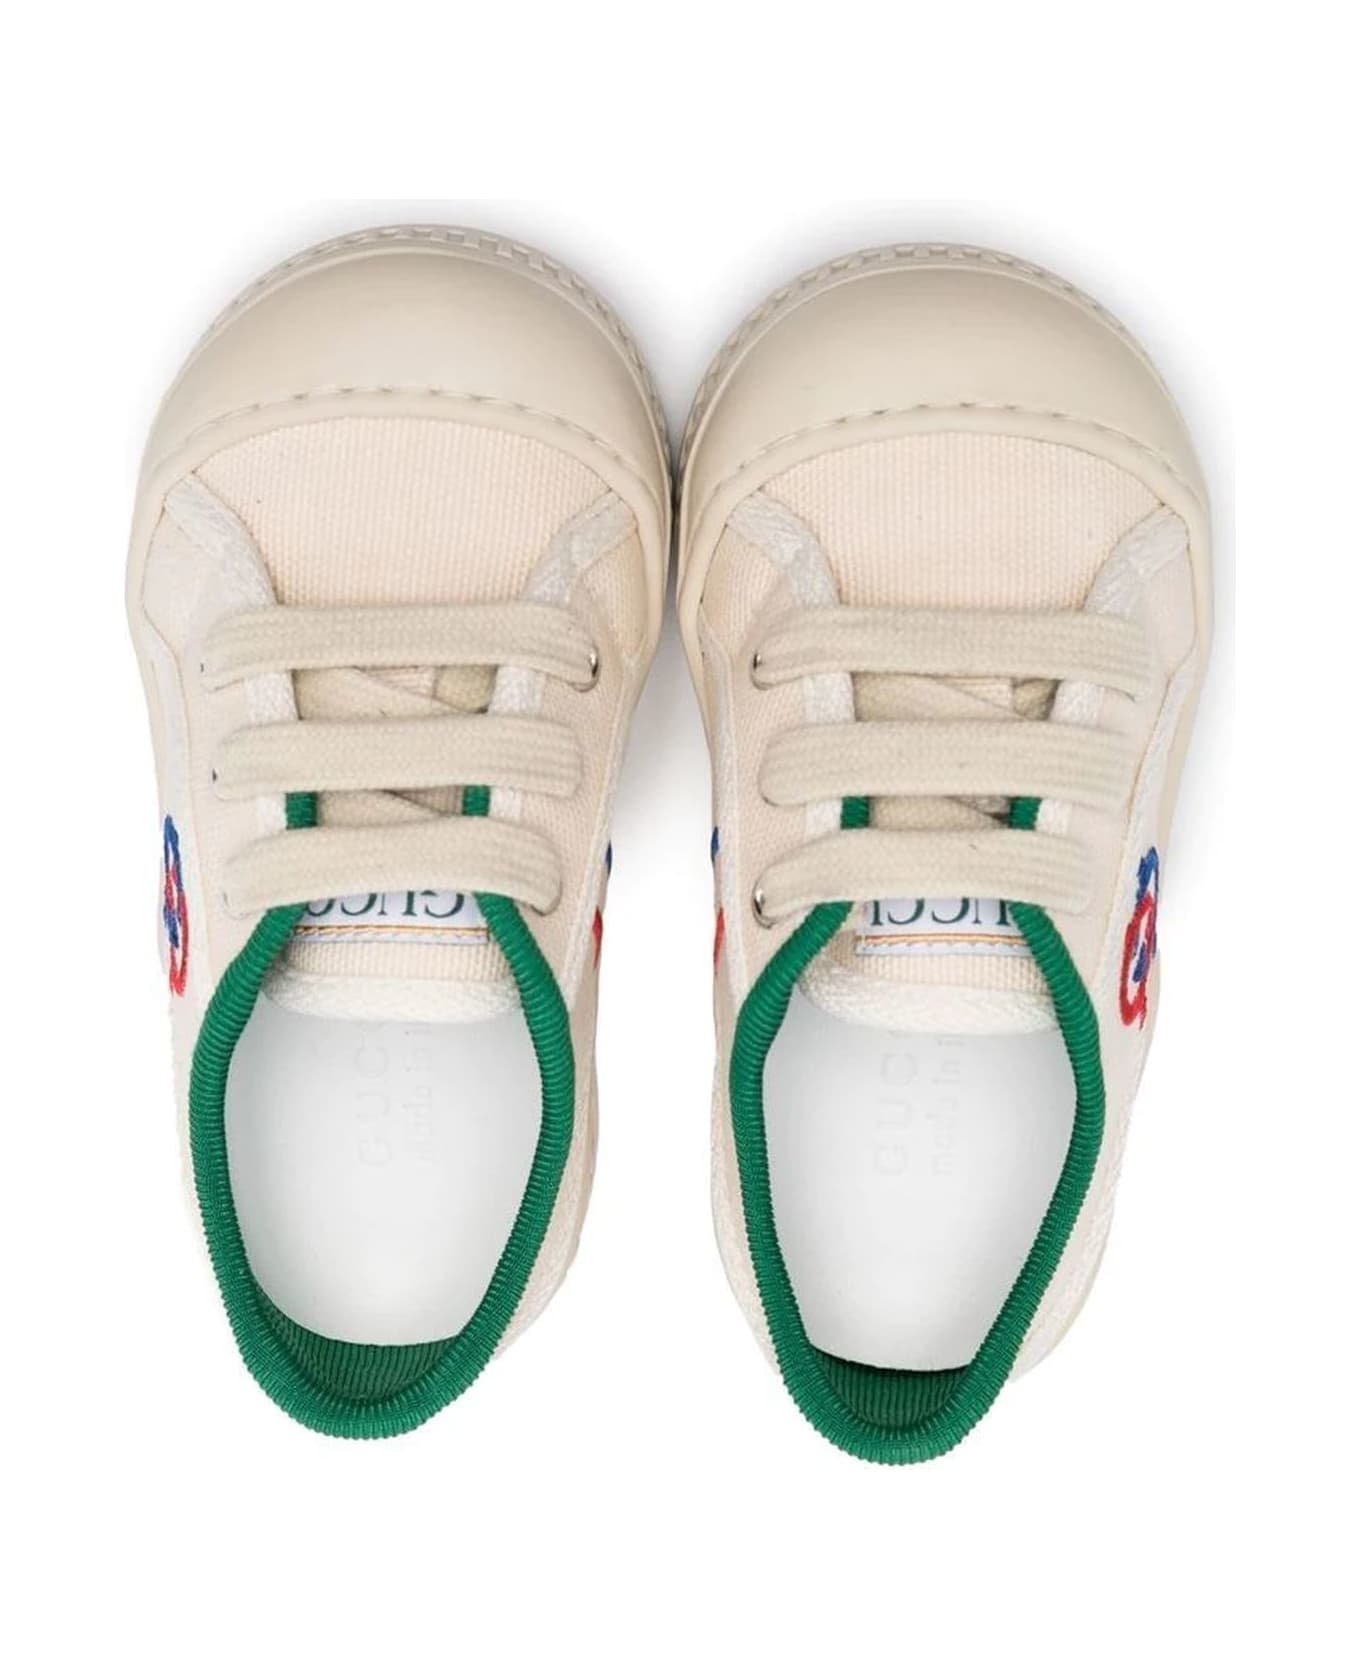 Gucci White Fabric Sneakers - Beige